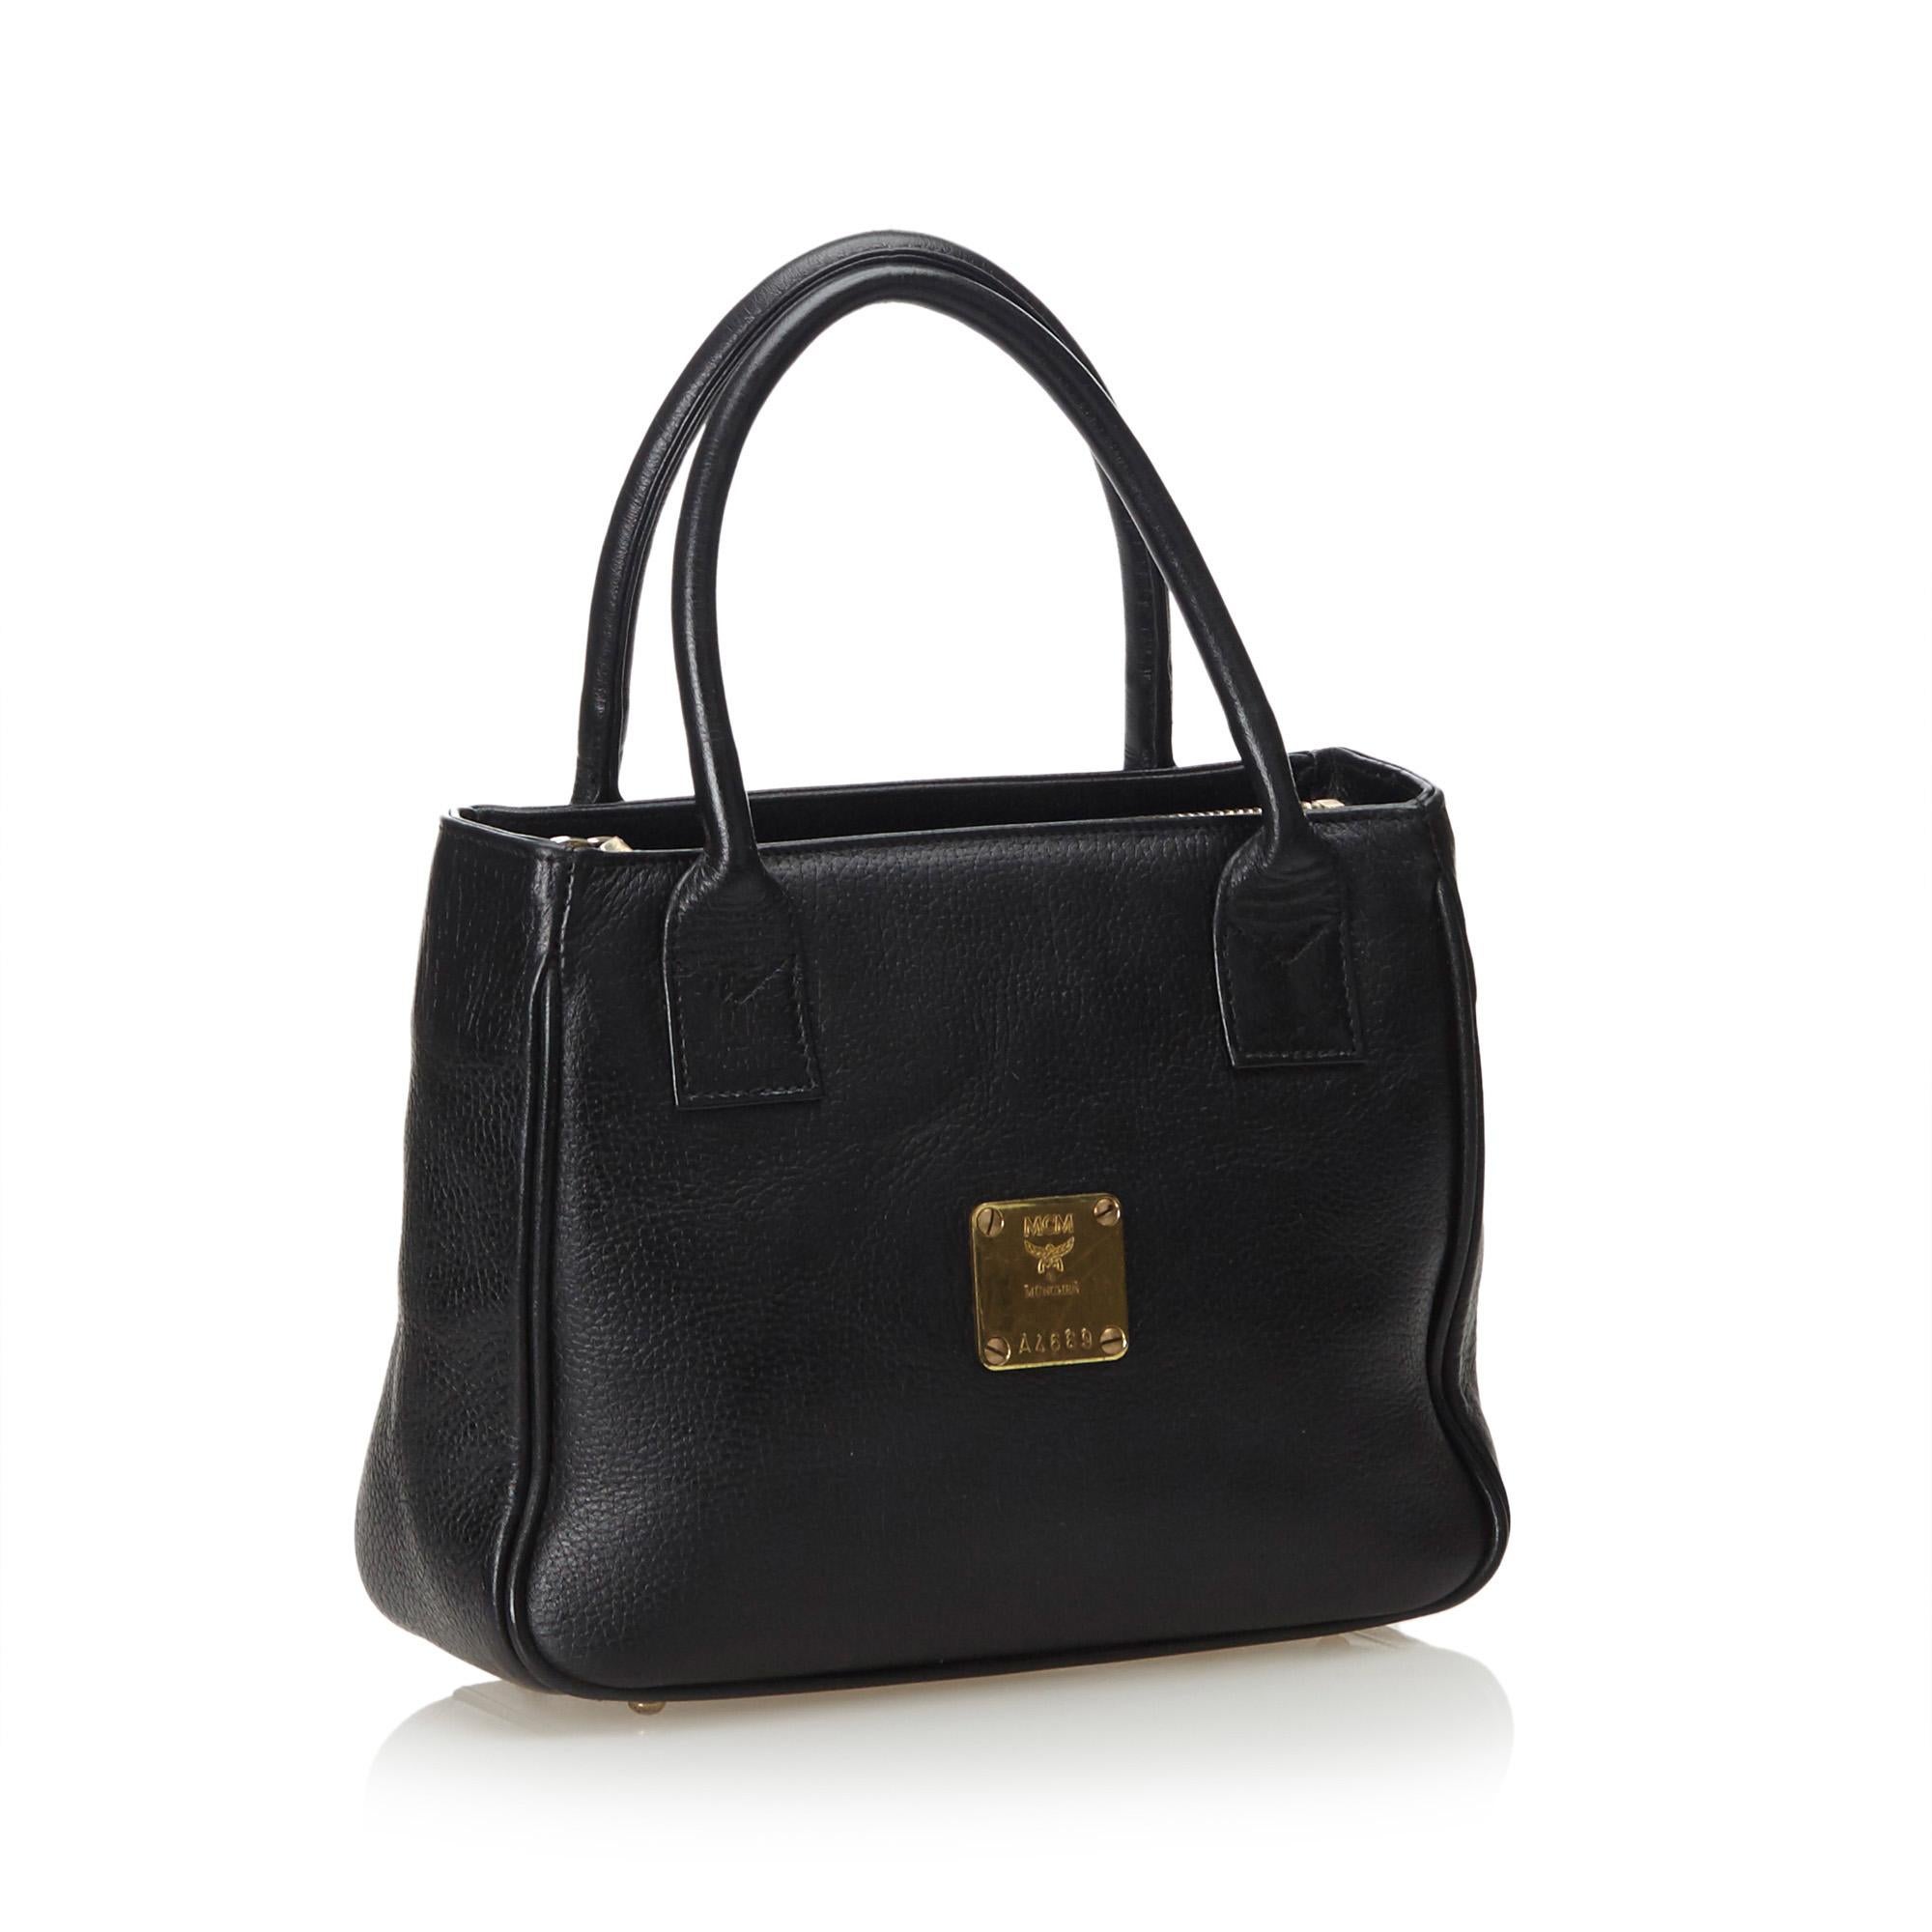 This handbag features a leather body, rolled handles, top zip closure and interior zip pockets. It carries as B condition rating.

Inclusions: 
This item does not come with inclusions.

Dimensions:
Length: 18.00 cm
Width: 24.00 cm
Depth: 8.50